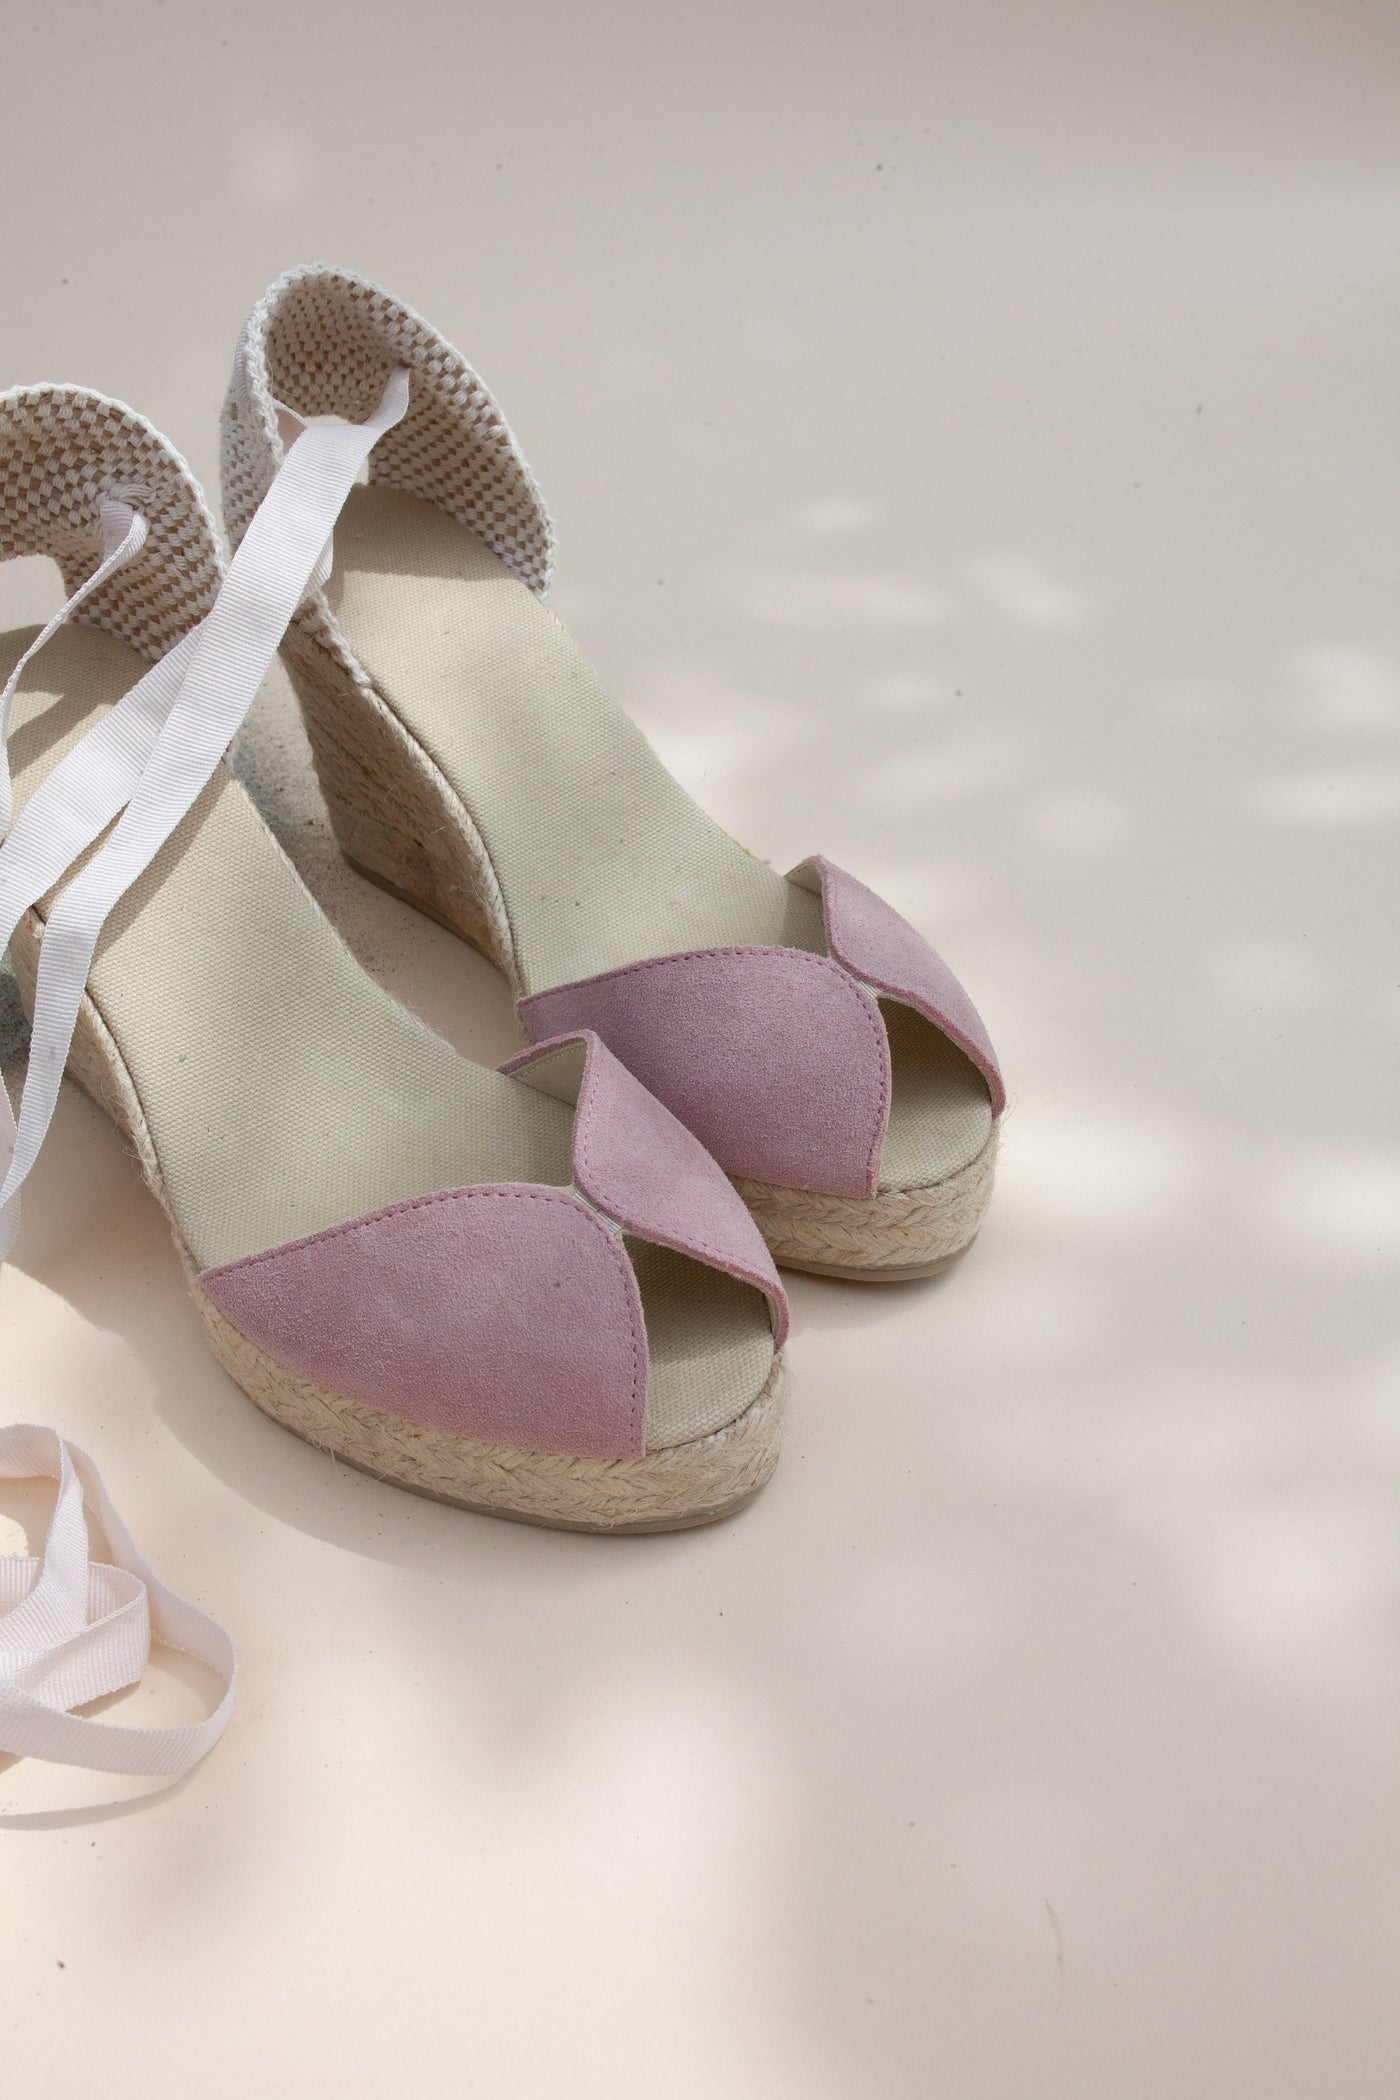 The Soft Pink Peep Toe Wedges